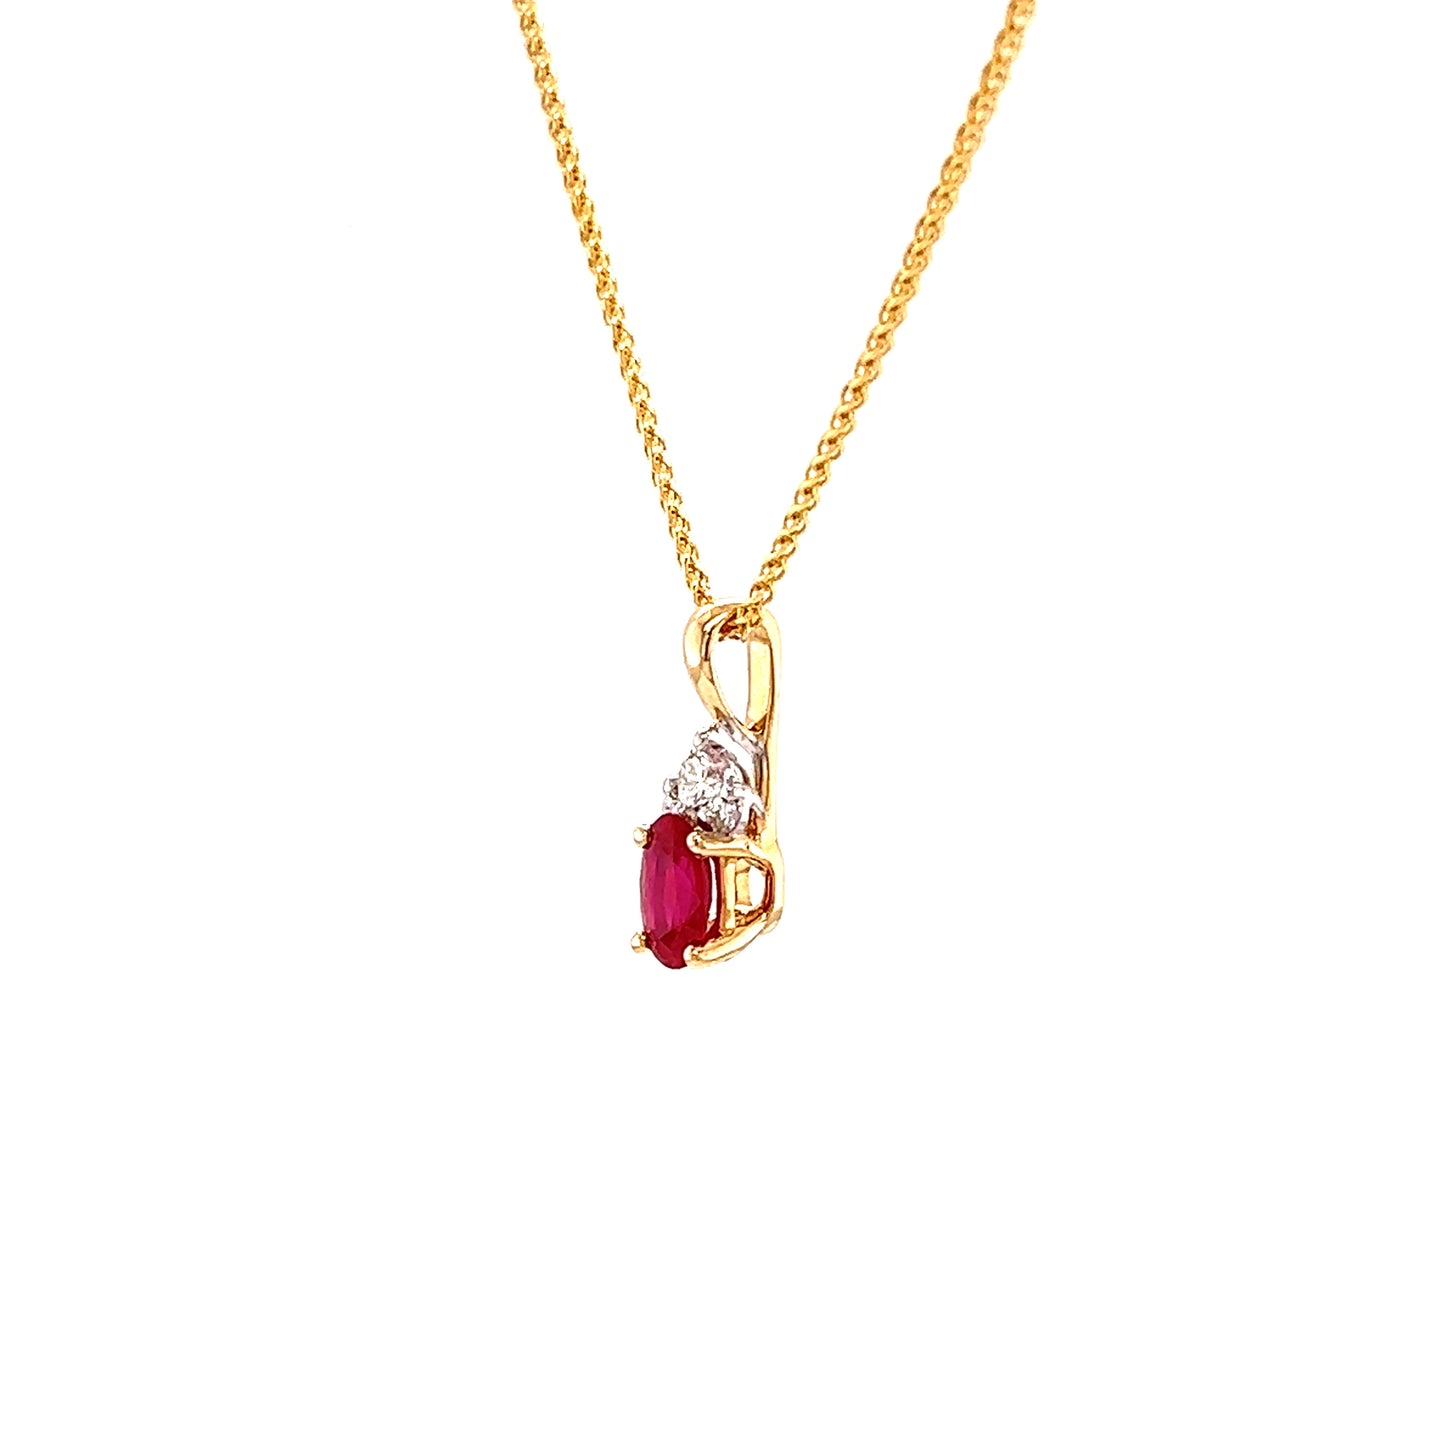 Oval Ruby Pendant with Three Accent Diamonds in 14K Yellow Gold Pendant and Chain Right Side View